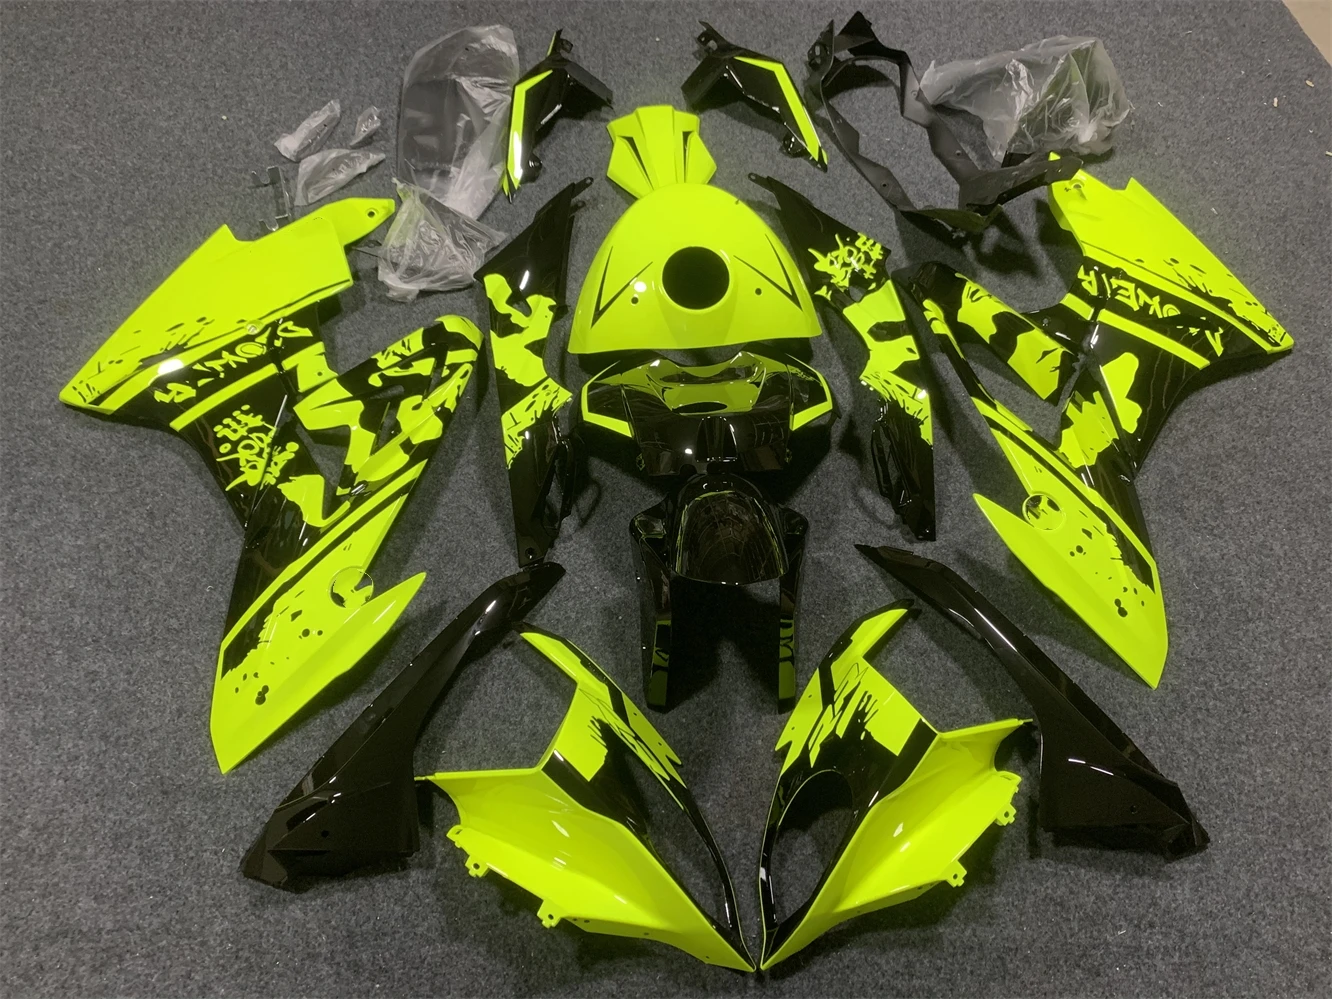 

Motorcycle Fairings Kit Fit For S1000rr 2015 2016 2017 2018 Bodywork Set High Quality ABS Injection Neon Fluorescence Black